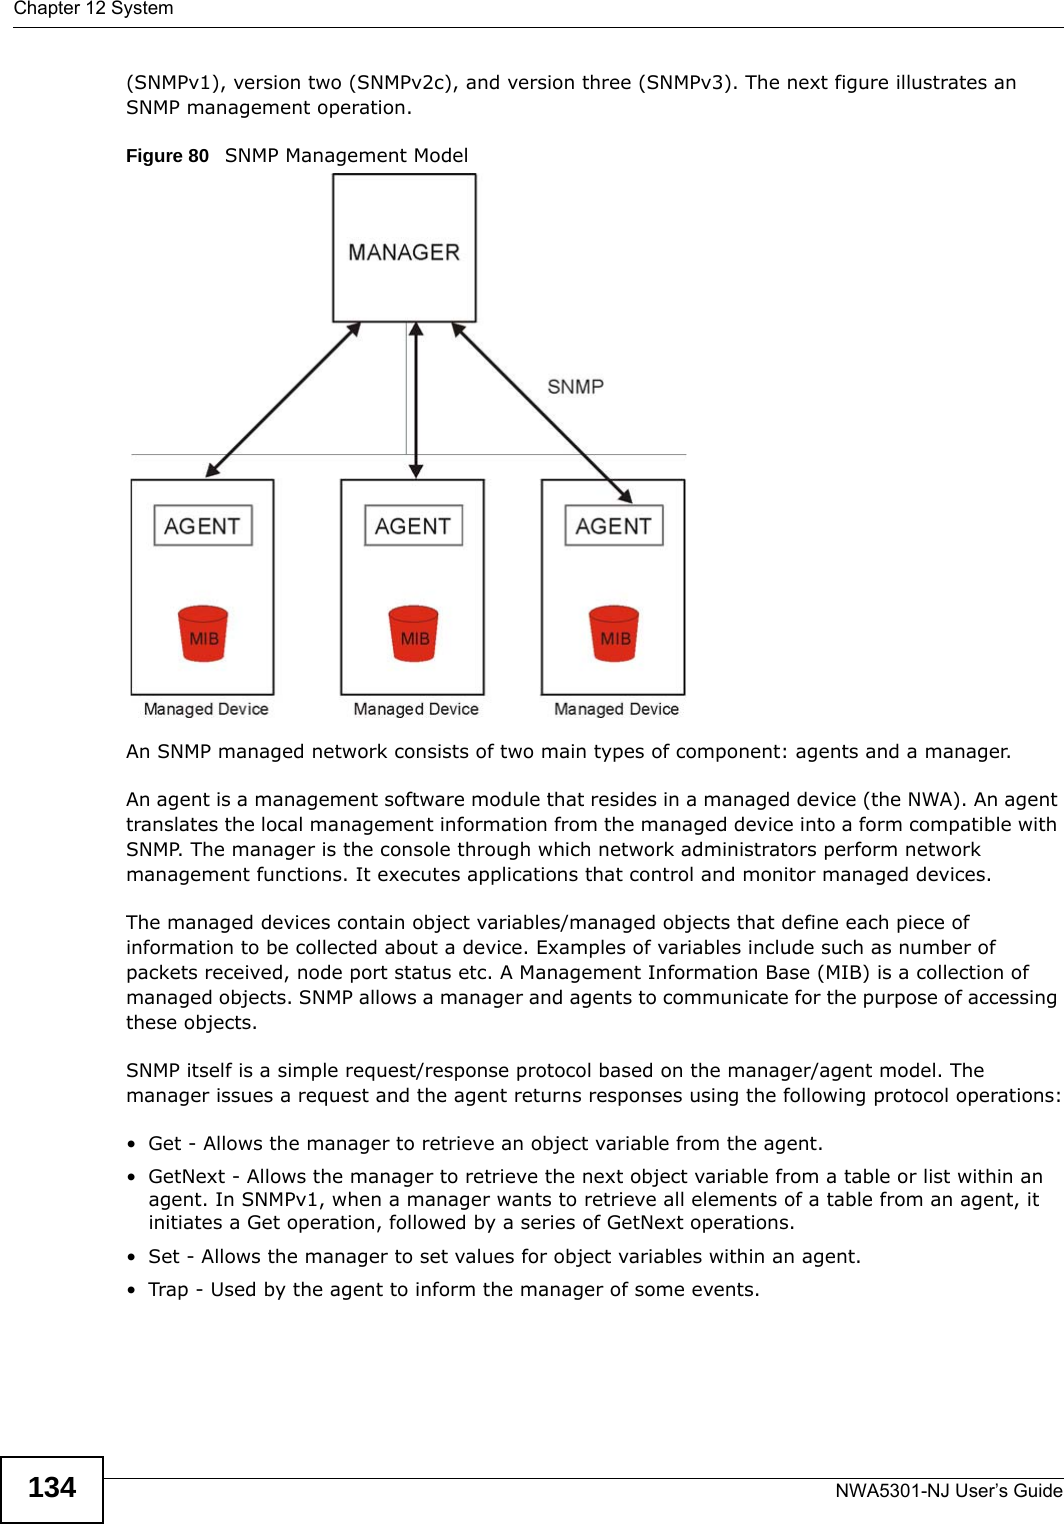 Chapter 12 SystemNWA5301-NJ User’s Guide134(SNMPv1), version two (SNMPv2c), and version three (SNMPv3). The next figure illustrates an SNMP management operation.   Figure 80   SNMP Management ModelAn SNMP managed network consists of two main types of component: agents and a manager. An agent is a management software module that resides in a managed device (the NWA). An agent translates the local management information from the managed device into a form compatible with SNMP. The manager is the console through which network administrators perform network management functions. It executes applications that control and monitor managed devices. The managed devices contain object variables/managed objects that define each piece of information to be collected about a device. Examples of variables include such as number of packets received, node port status etc. A Management Information Base (MIB) is a collection of managed objects. SNMP allows a manager and agents to communicate for the purpose of accessing these objects.SNMP itself is a simple request/response protocol based on the manager/agent model. The manager issues a request and the agent returns responses using the following protocol operations:• Get - Allows the manager to retrieve an object variable from the agent. • GetNext - Allows the manager to retrieve the next object variable from a table or list within an agent. In SNMPv1, when a manager wants to retrieve all elements of a table from an agent, it initiates a Get operation, followed by a series of GetNext operations. • Set - Allows the manager to set values for object variables within an agent. • Trap - Used by the agent to inform the manager of some events.